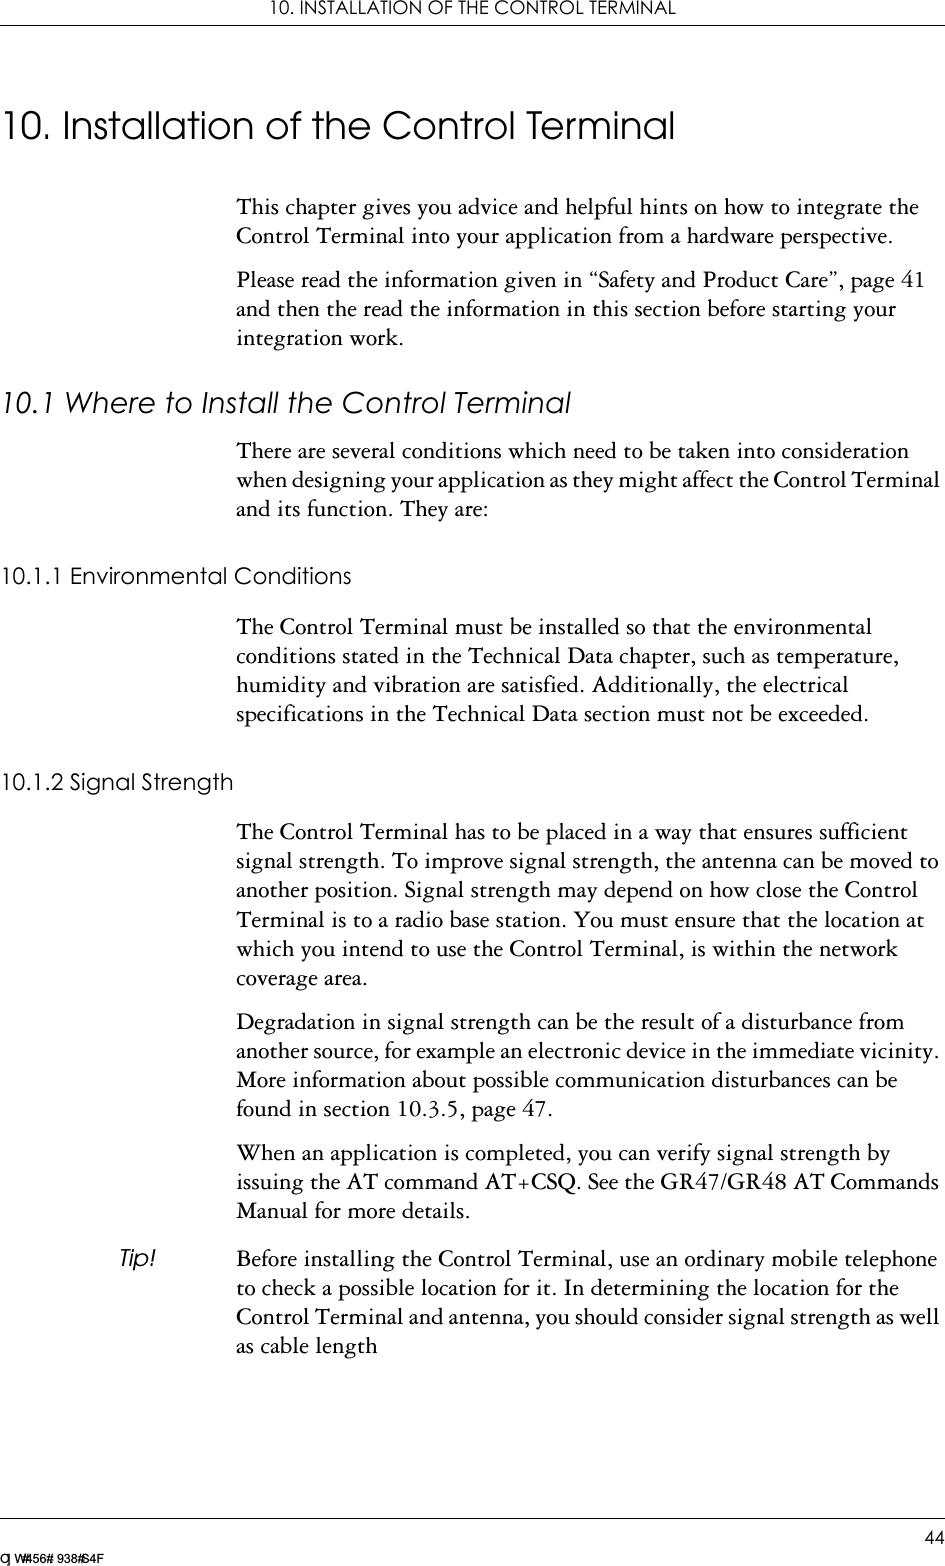 10. INSTALLATION OF THE CONTROL TERMINAL44LZ T 123 7605 P1C10. Installation of the Control TerminalThis chapter gives you advice and helpful hints on how to integrate the Control Terminal into your application from a hardware perspective.Please read the information given in “Safety and Product Care”, page 41 and then the read the information in this section before starting your integration work.10.1 Where to Install the Control TerminalThere are several conditions which need to be taken into consideration when designing your application as they might affect the Control Terminal and its function. They are:10.1.1 Environmental ConditionsThe Control Terminal must be installed so that the environmental conditions stated in the Technical Data chapter, such as temperature, humidity and vibration are satisfied. Additionally, the electrical specifications in the Technical Data section must not be exceeded.10.1.2 Signal StrengthThe Control Terminal has to be placed in a way that ensures sufficient signal strength. To improve signal strength, the antenna can be moved to another position. Signal strength may depend on how close the Control Terminal is to a radio base station. You must ensure that the location at which you intend to use the Control Terminal, is within the network coverage area. Degradation in signal strength can be the result of a disturbance from another source, for example an electronic device in the immediate vicinity. More information about possible communication disturbances can be found in section 10.3.5, page 47.When an application is completed, you can verify signal strength by issuing the AT command AT+CSQ. See the GR47/GR48 AT Commands Manual for more details.Tip! Before installing the Control Terminal, use an ordinary mobile telephone to check a possible location for it. In determining the location for the Control Terminal and antenna, you should consider signal strength as well as cable length